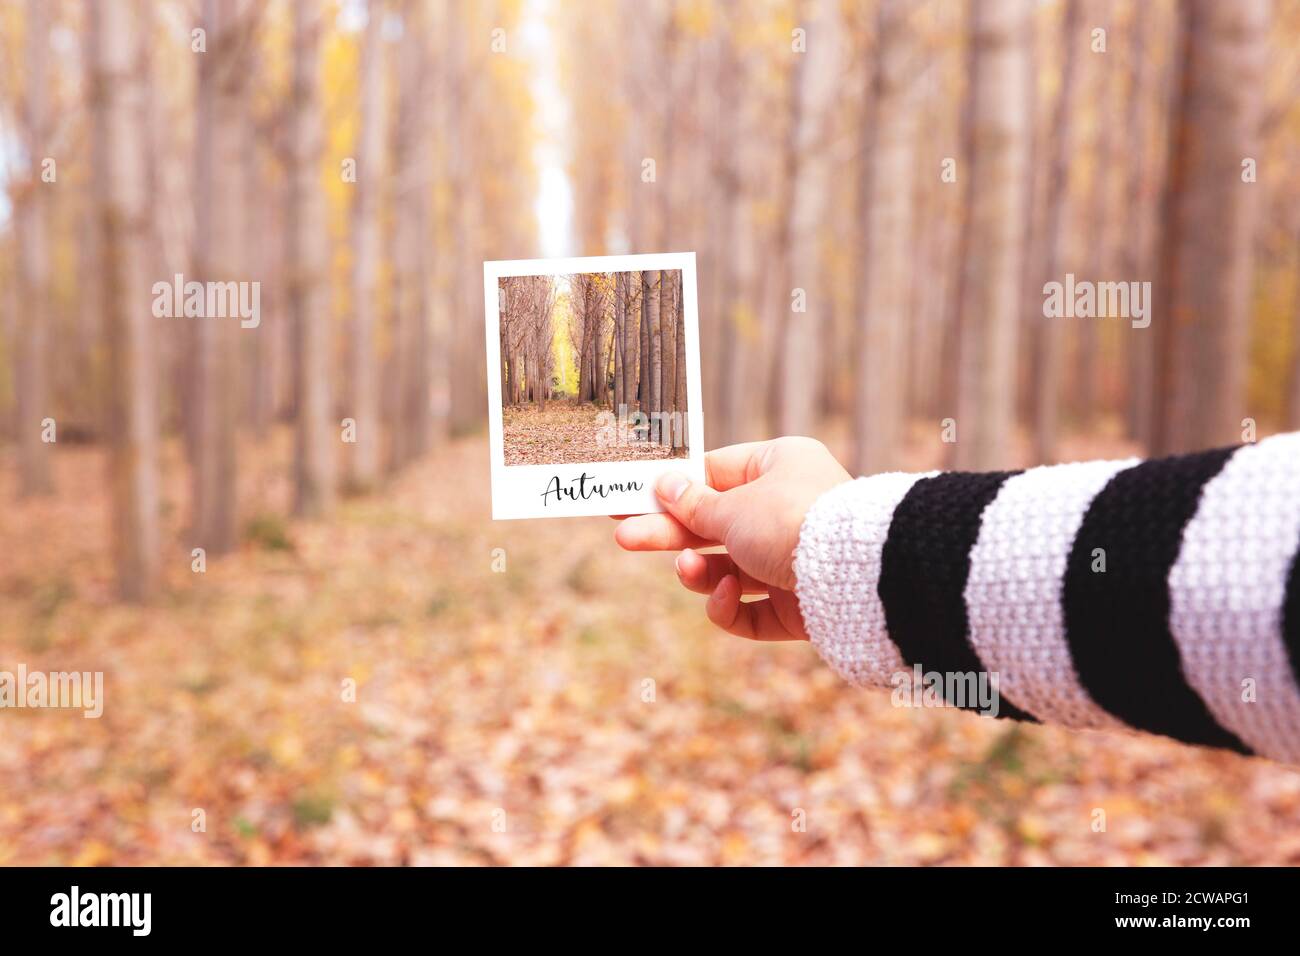 Close up of woman's hand holding and matching a snapshot with the scenery of a forest in the autumn season. Stock Photo